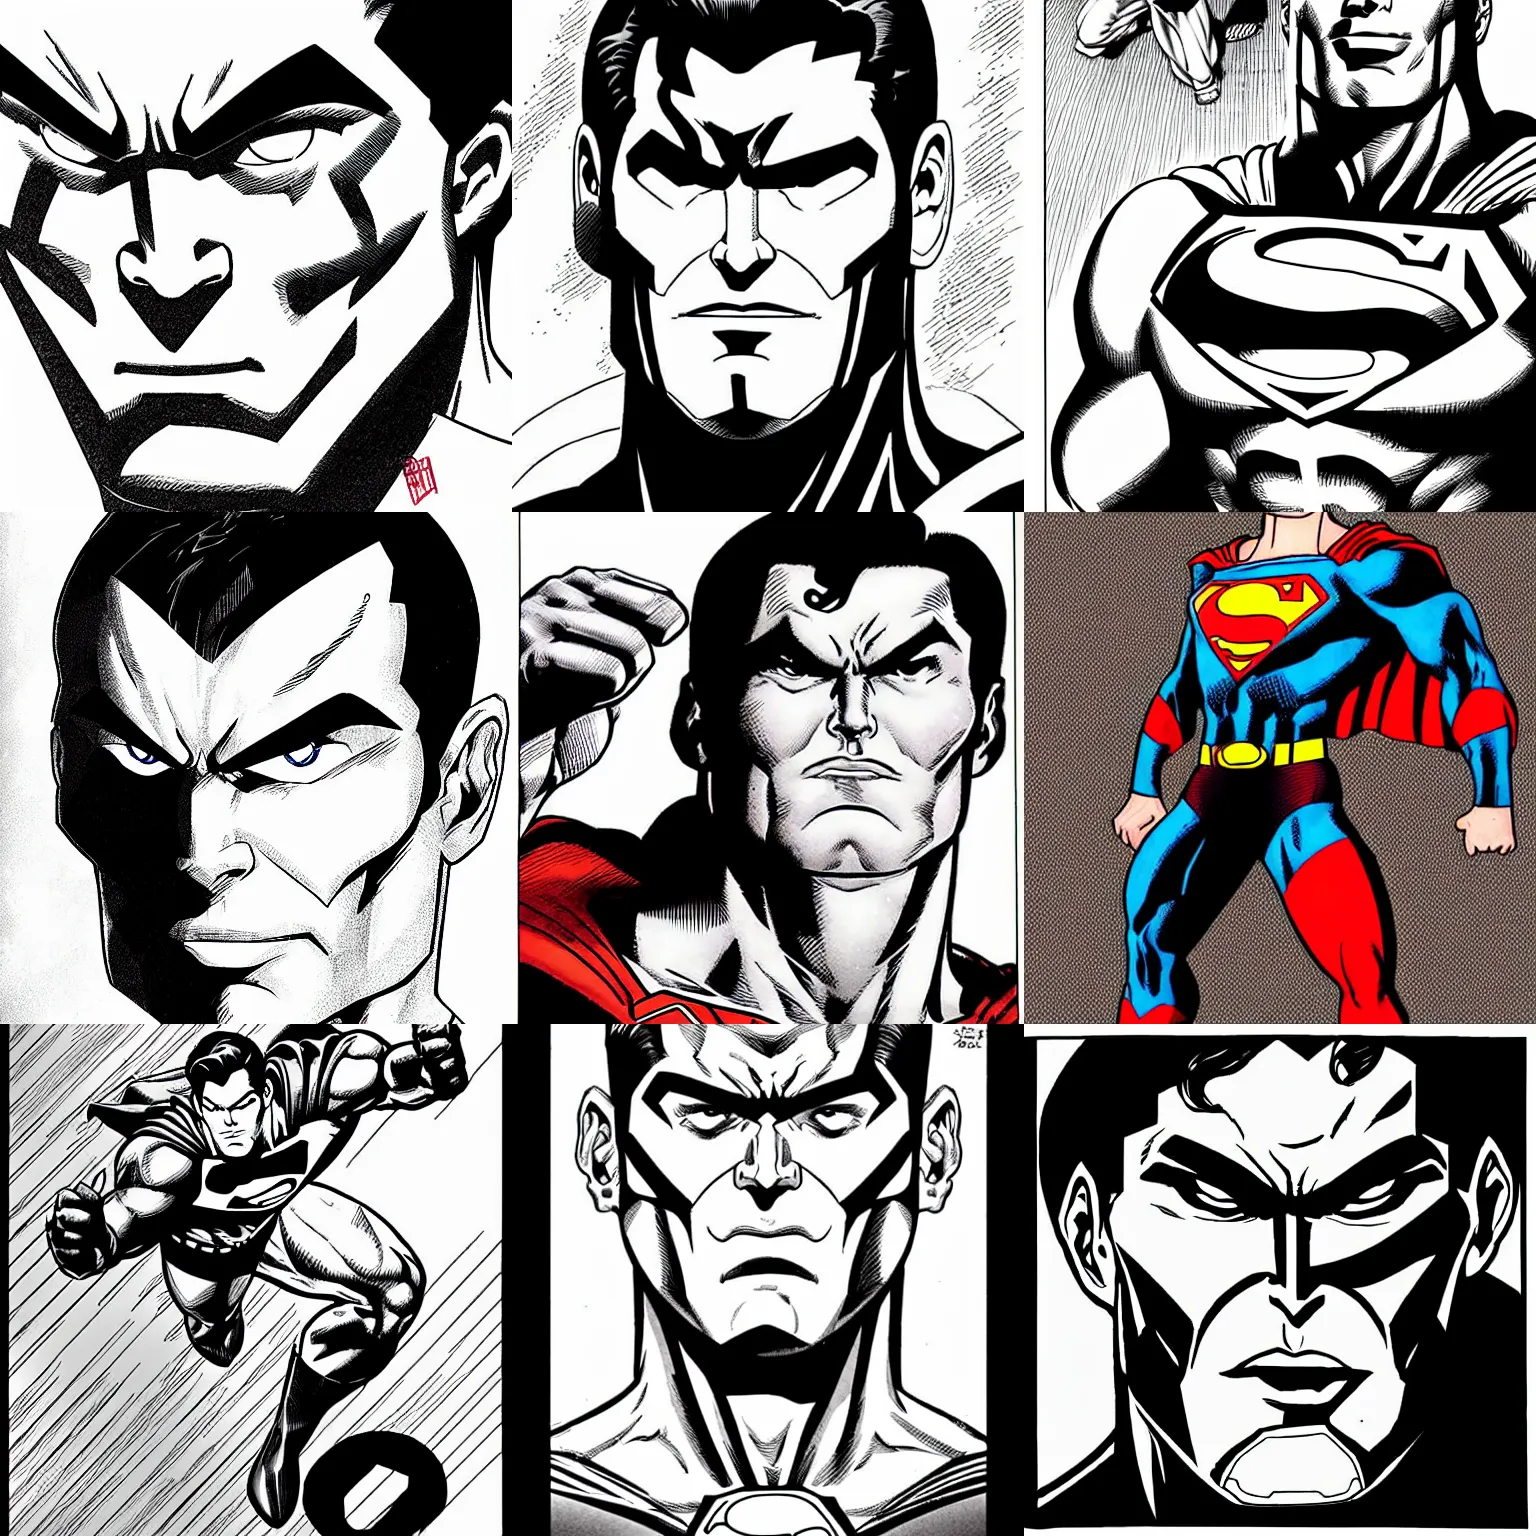 Prompt: male!!! jim lee!!! macro face shot!! flat ink sketch by romita face close up headshot superman costume in the style of romita, x - men superhero comic book character by romita